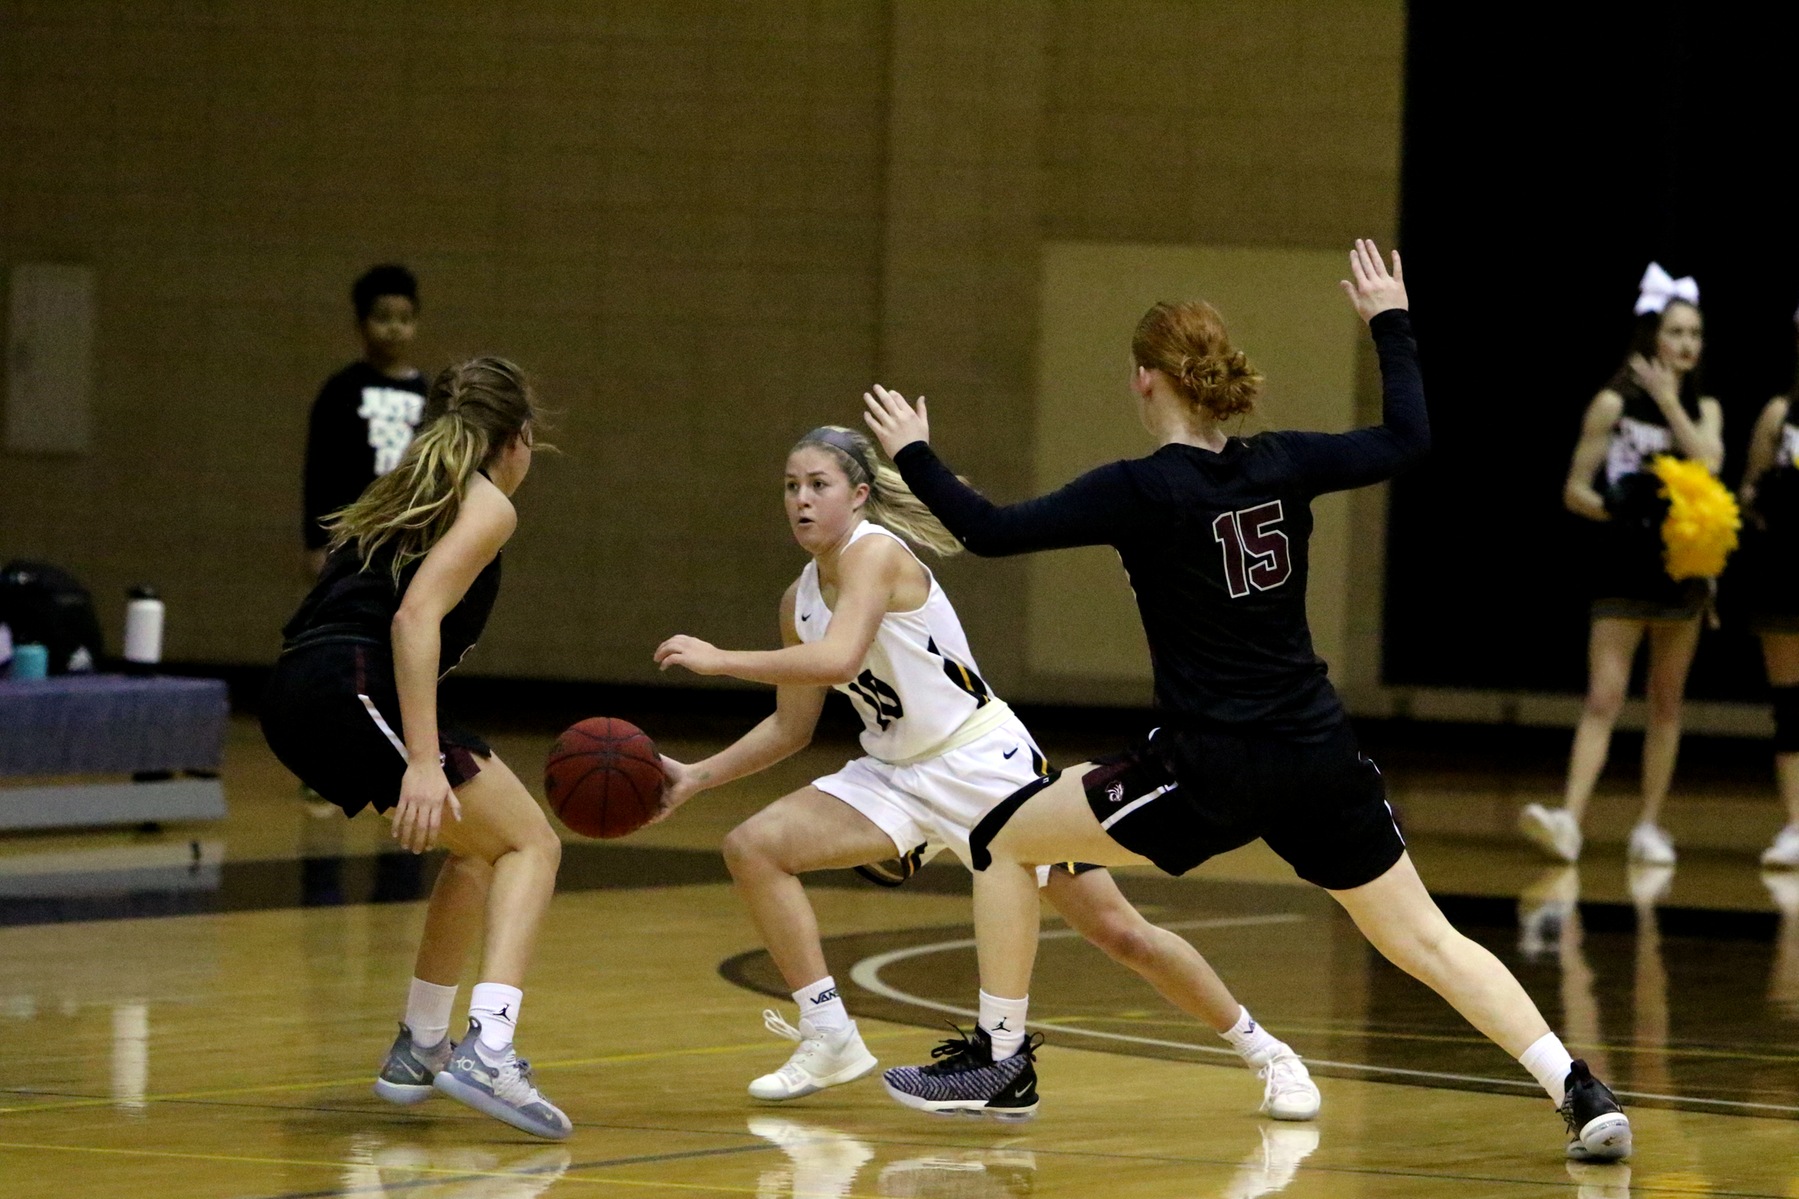 Women's Basketball Loses to Trinity at Home